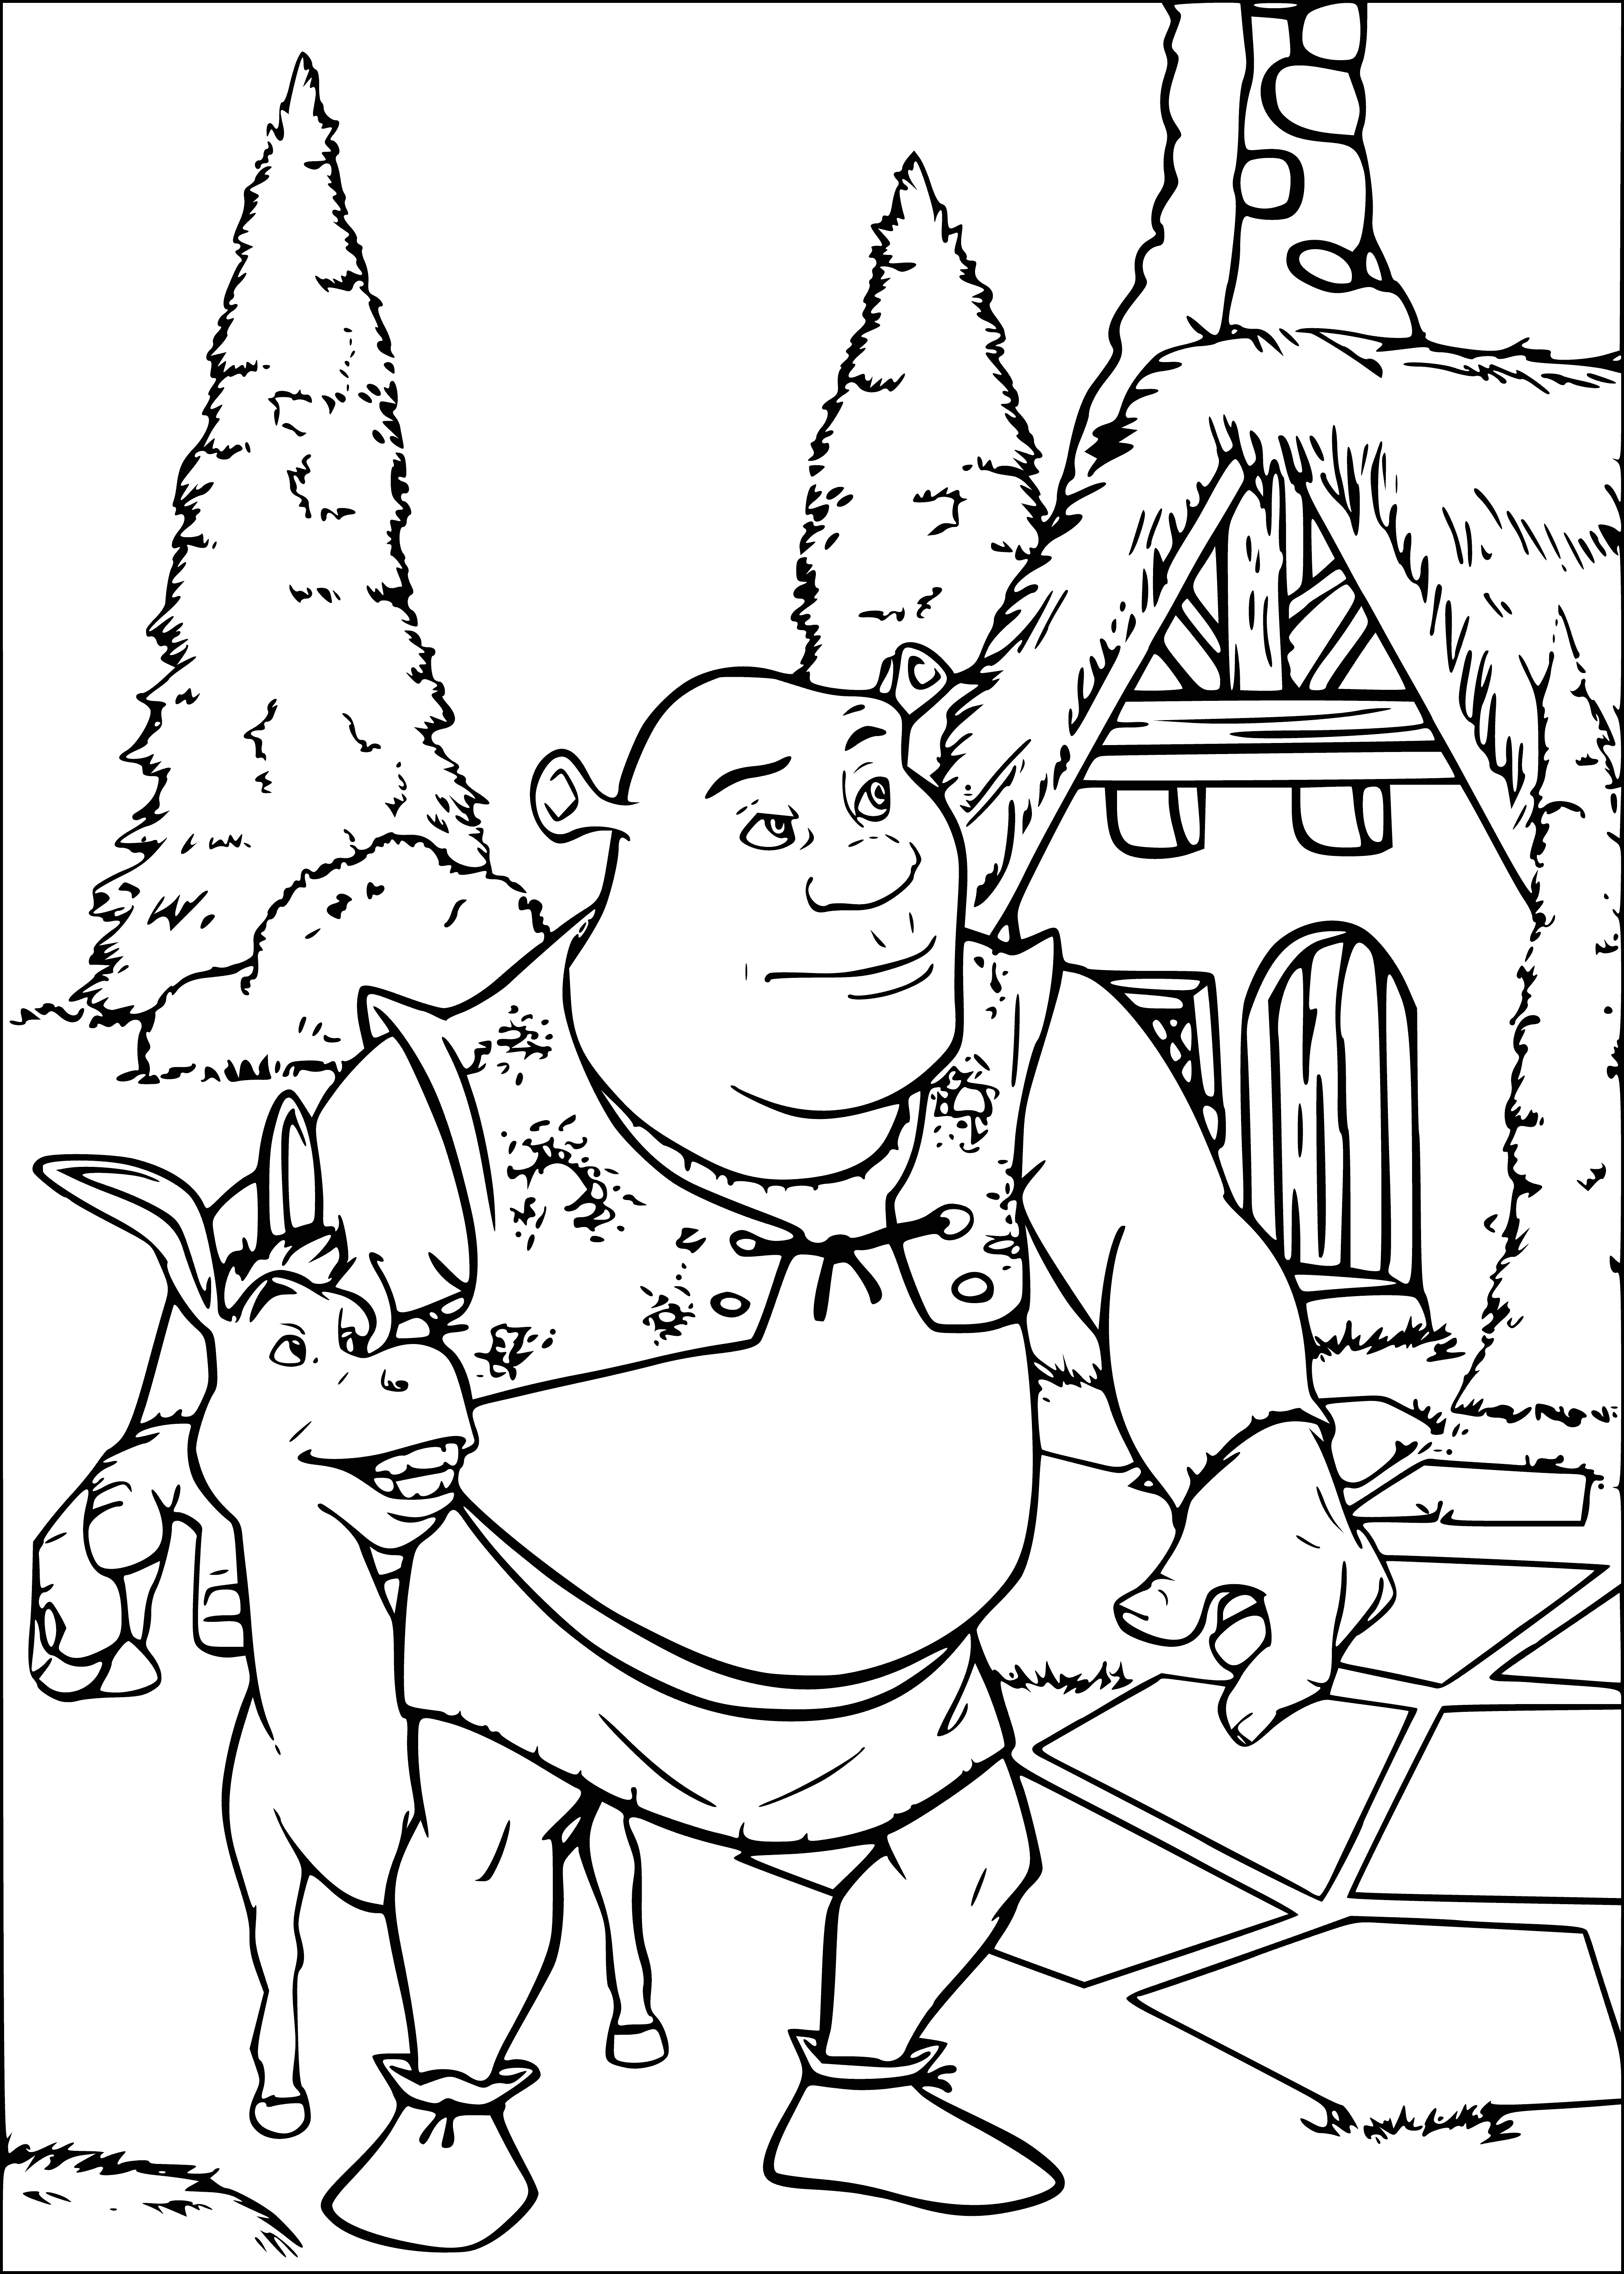 coloring page: Shrek & Donkey stand side-by-side in a field, both glaring at the camera with serious expressions.